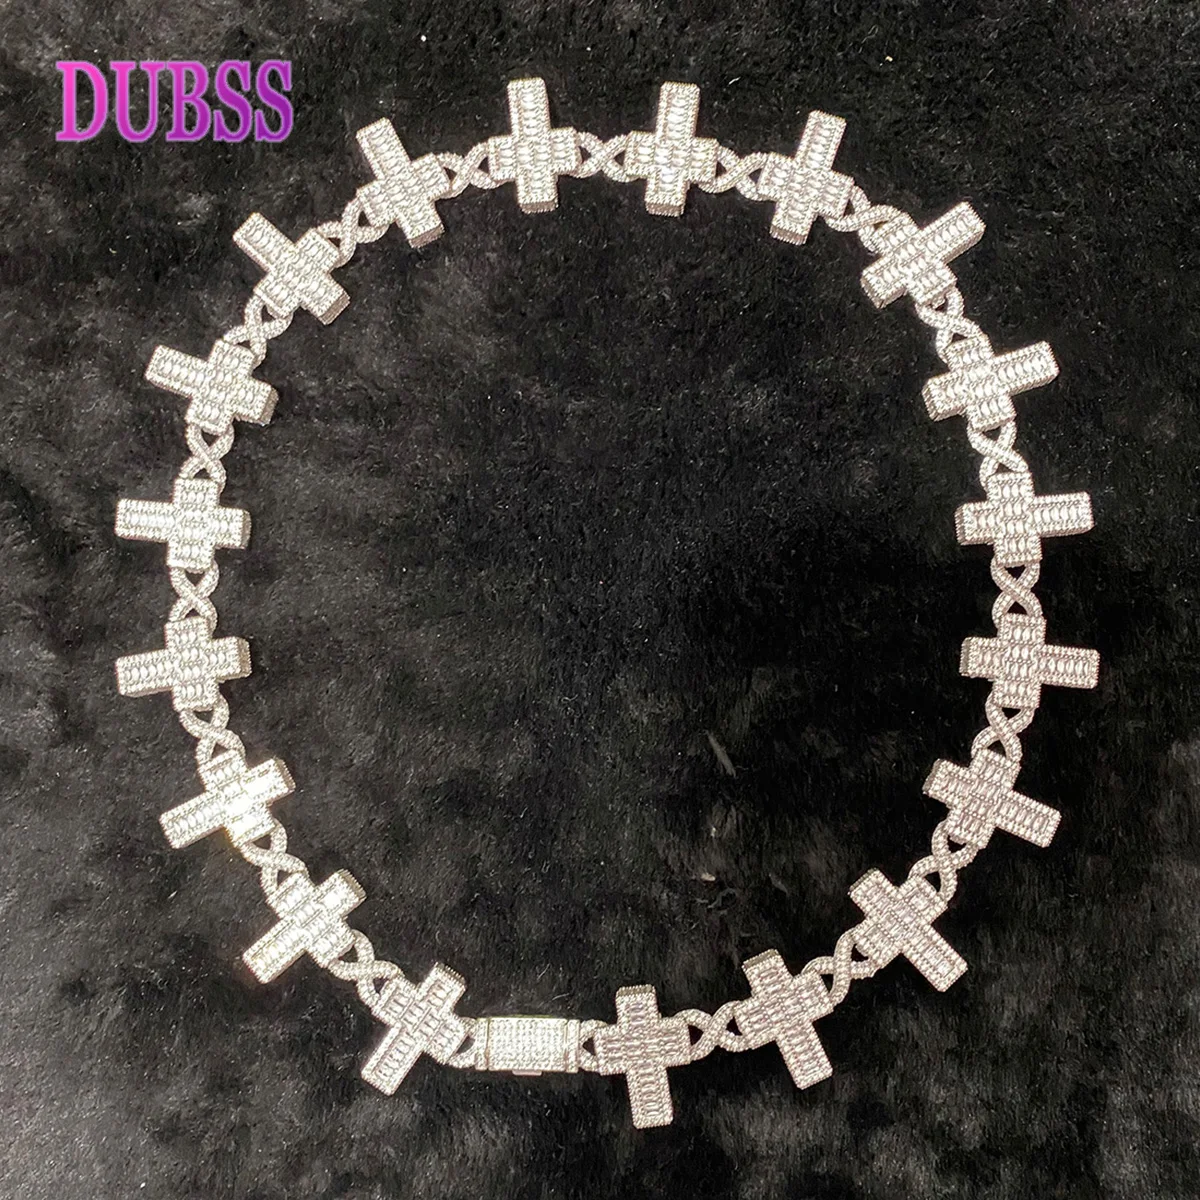 

DUBSS Iced Out Infinity Link Chain for Men Baguette Cross Necklace Choker Hip Hop Jewelry